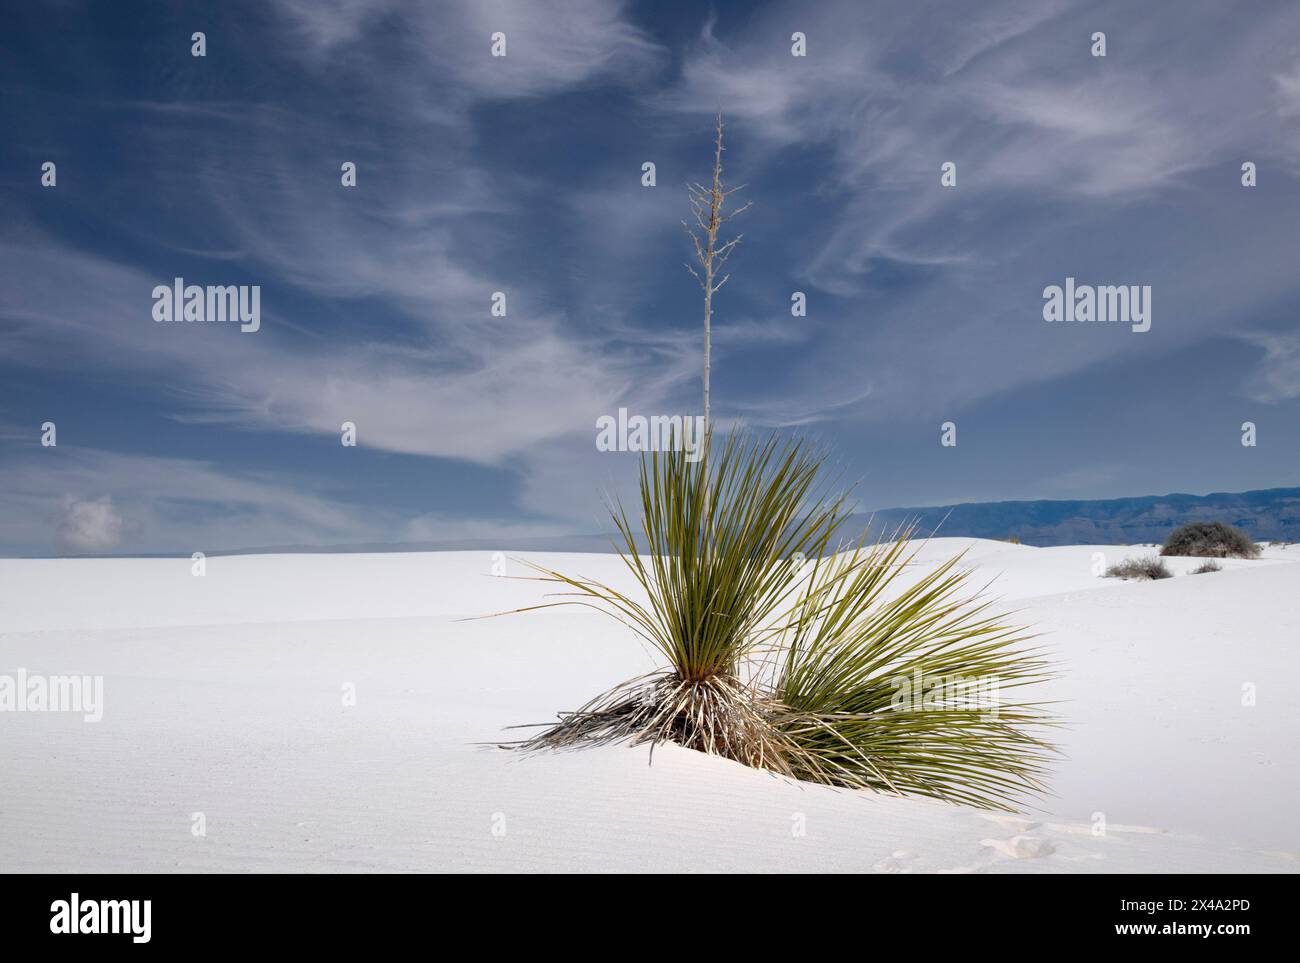 The Yucca plant, the official plant of New Mexico, struggles to survive in the gypsum dunes of White Sands National Park, Alamogordo, NM, USA Stock Photo